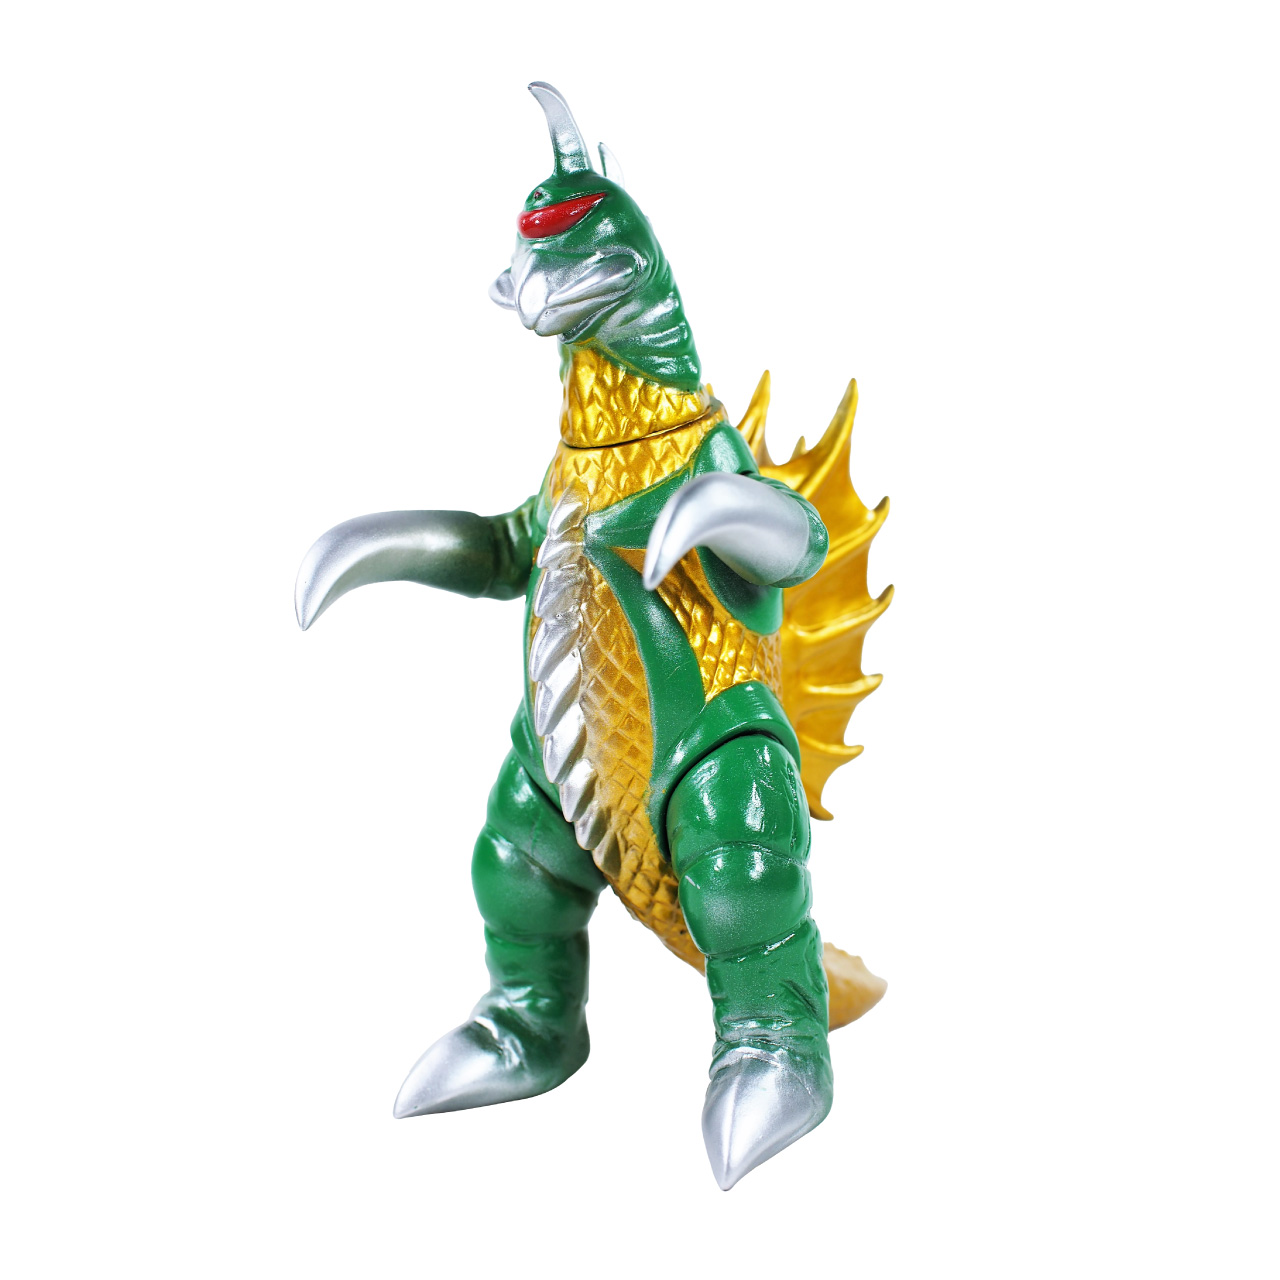 CCP Middle Size Series [5th] Gigan Emerald green